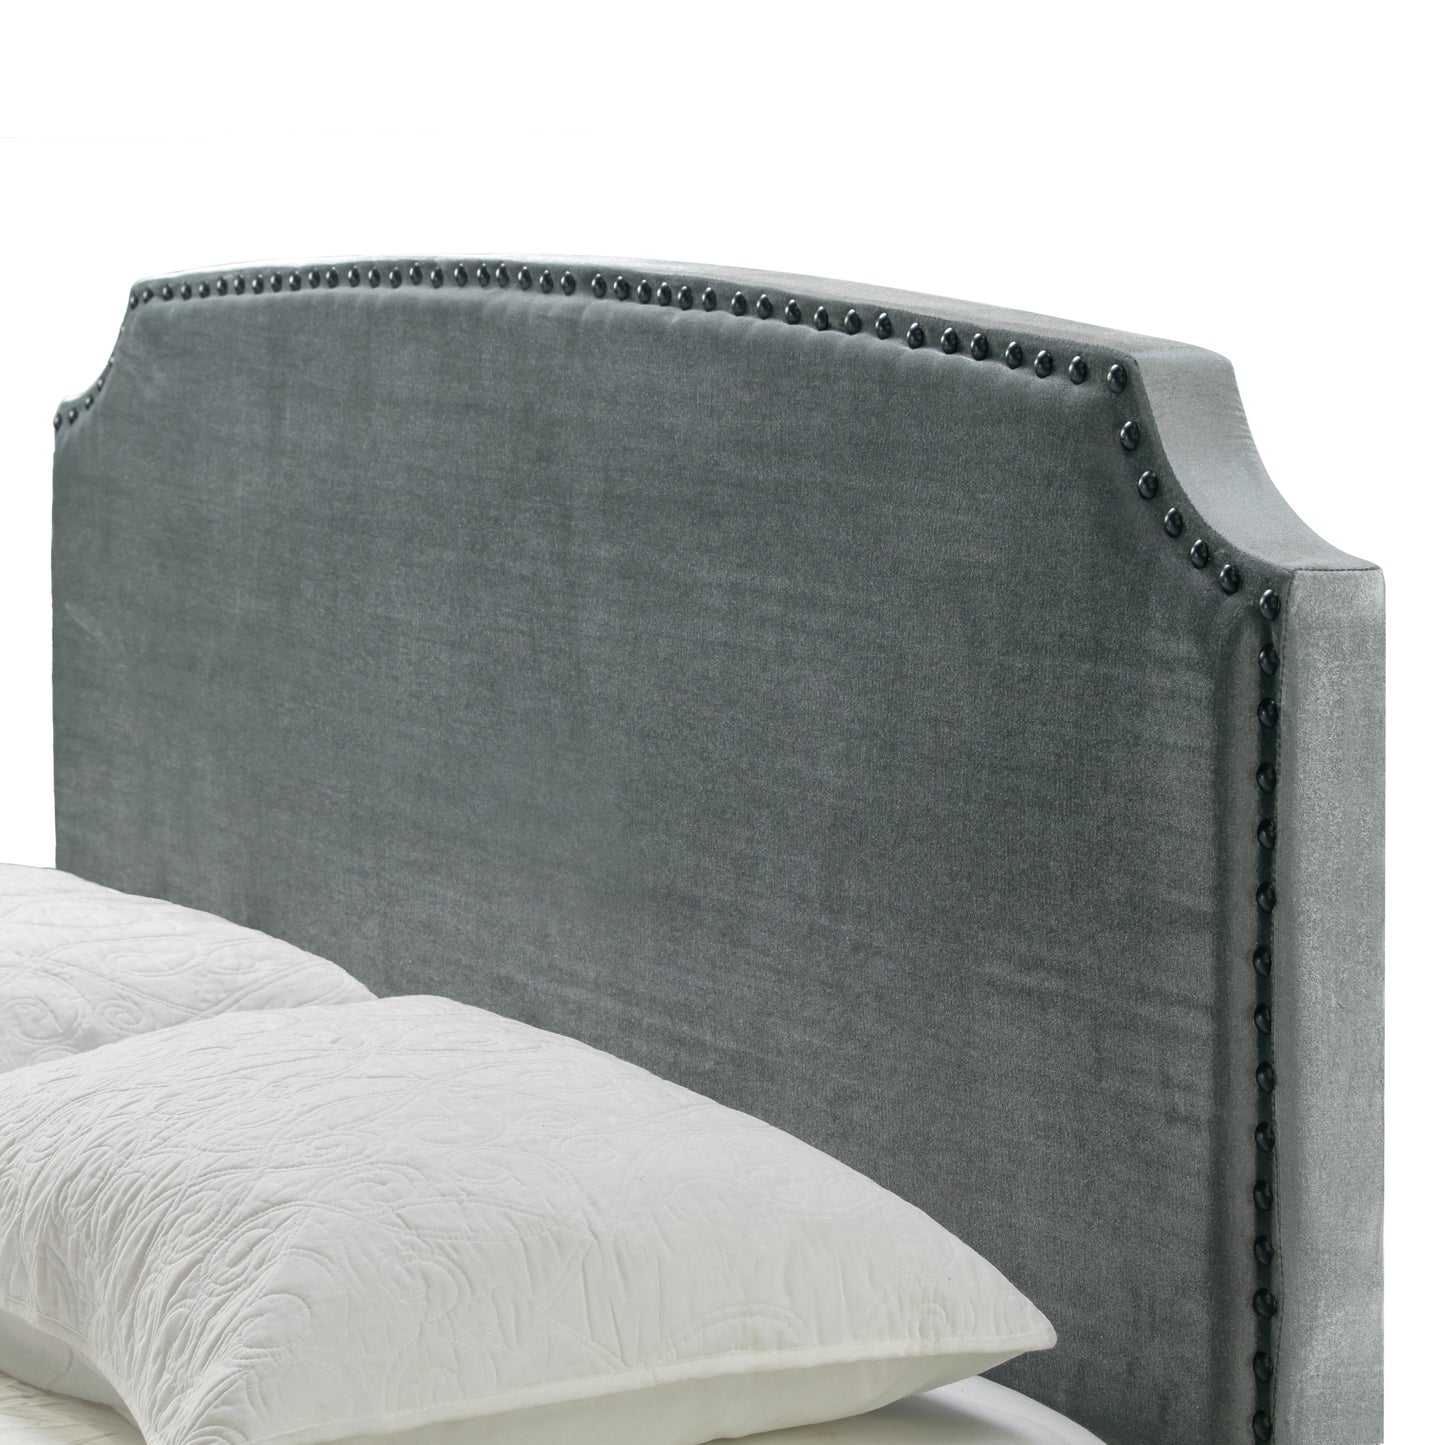 Arezo Silver Grey Velvet Queen Bed with Black Nail Head Trim